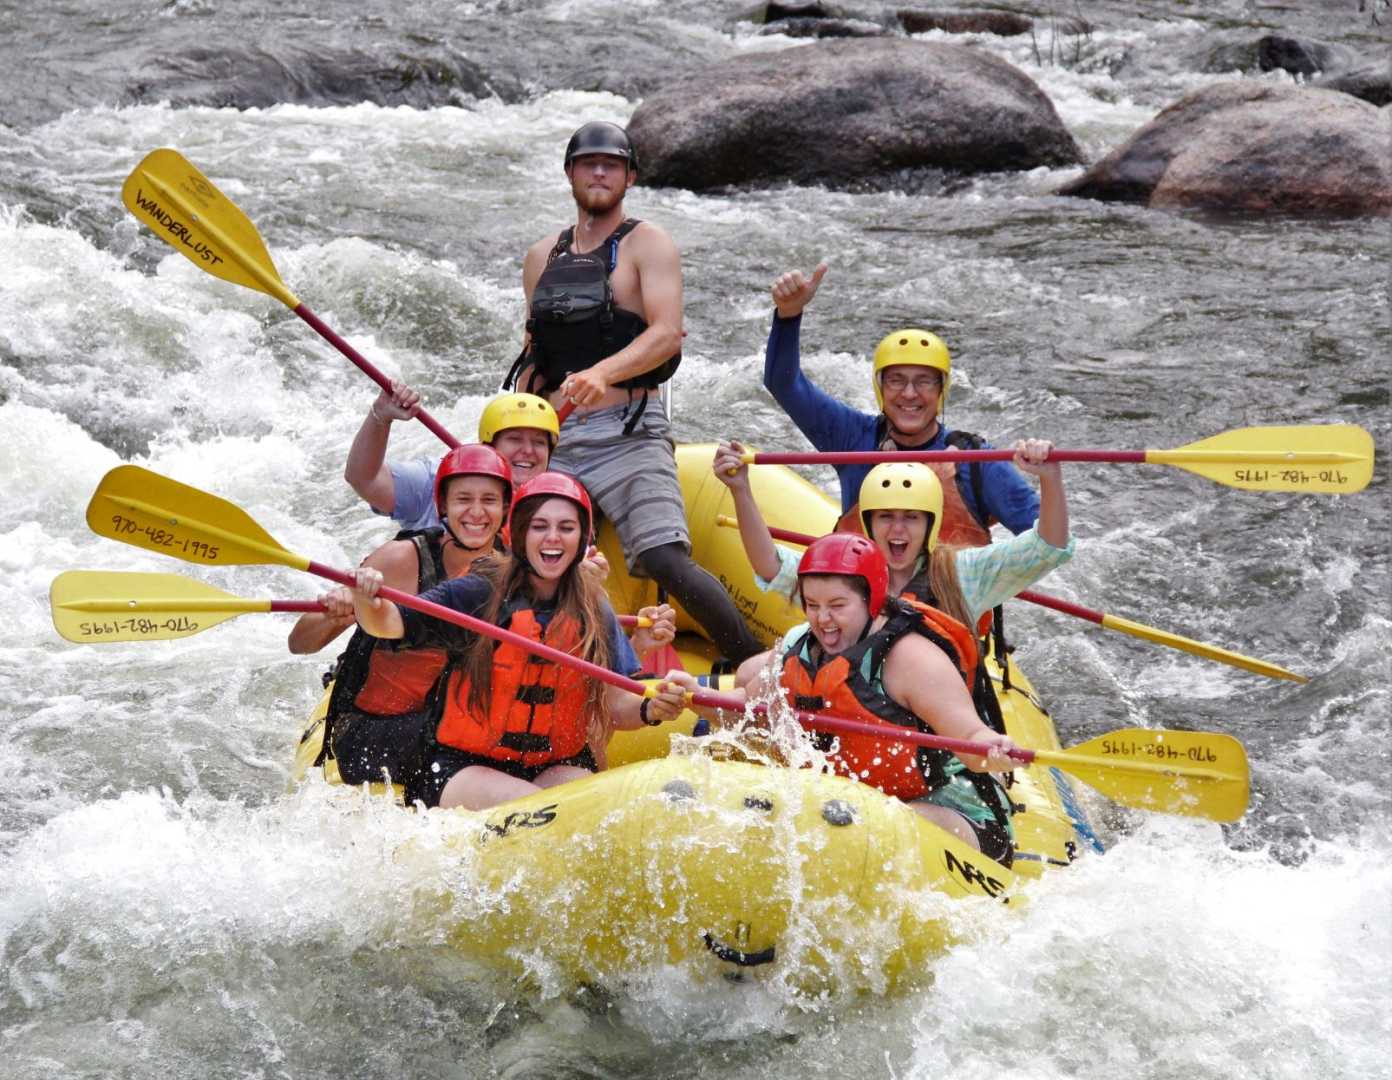 Fort Collins Whitewater Rafting